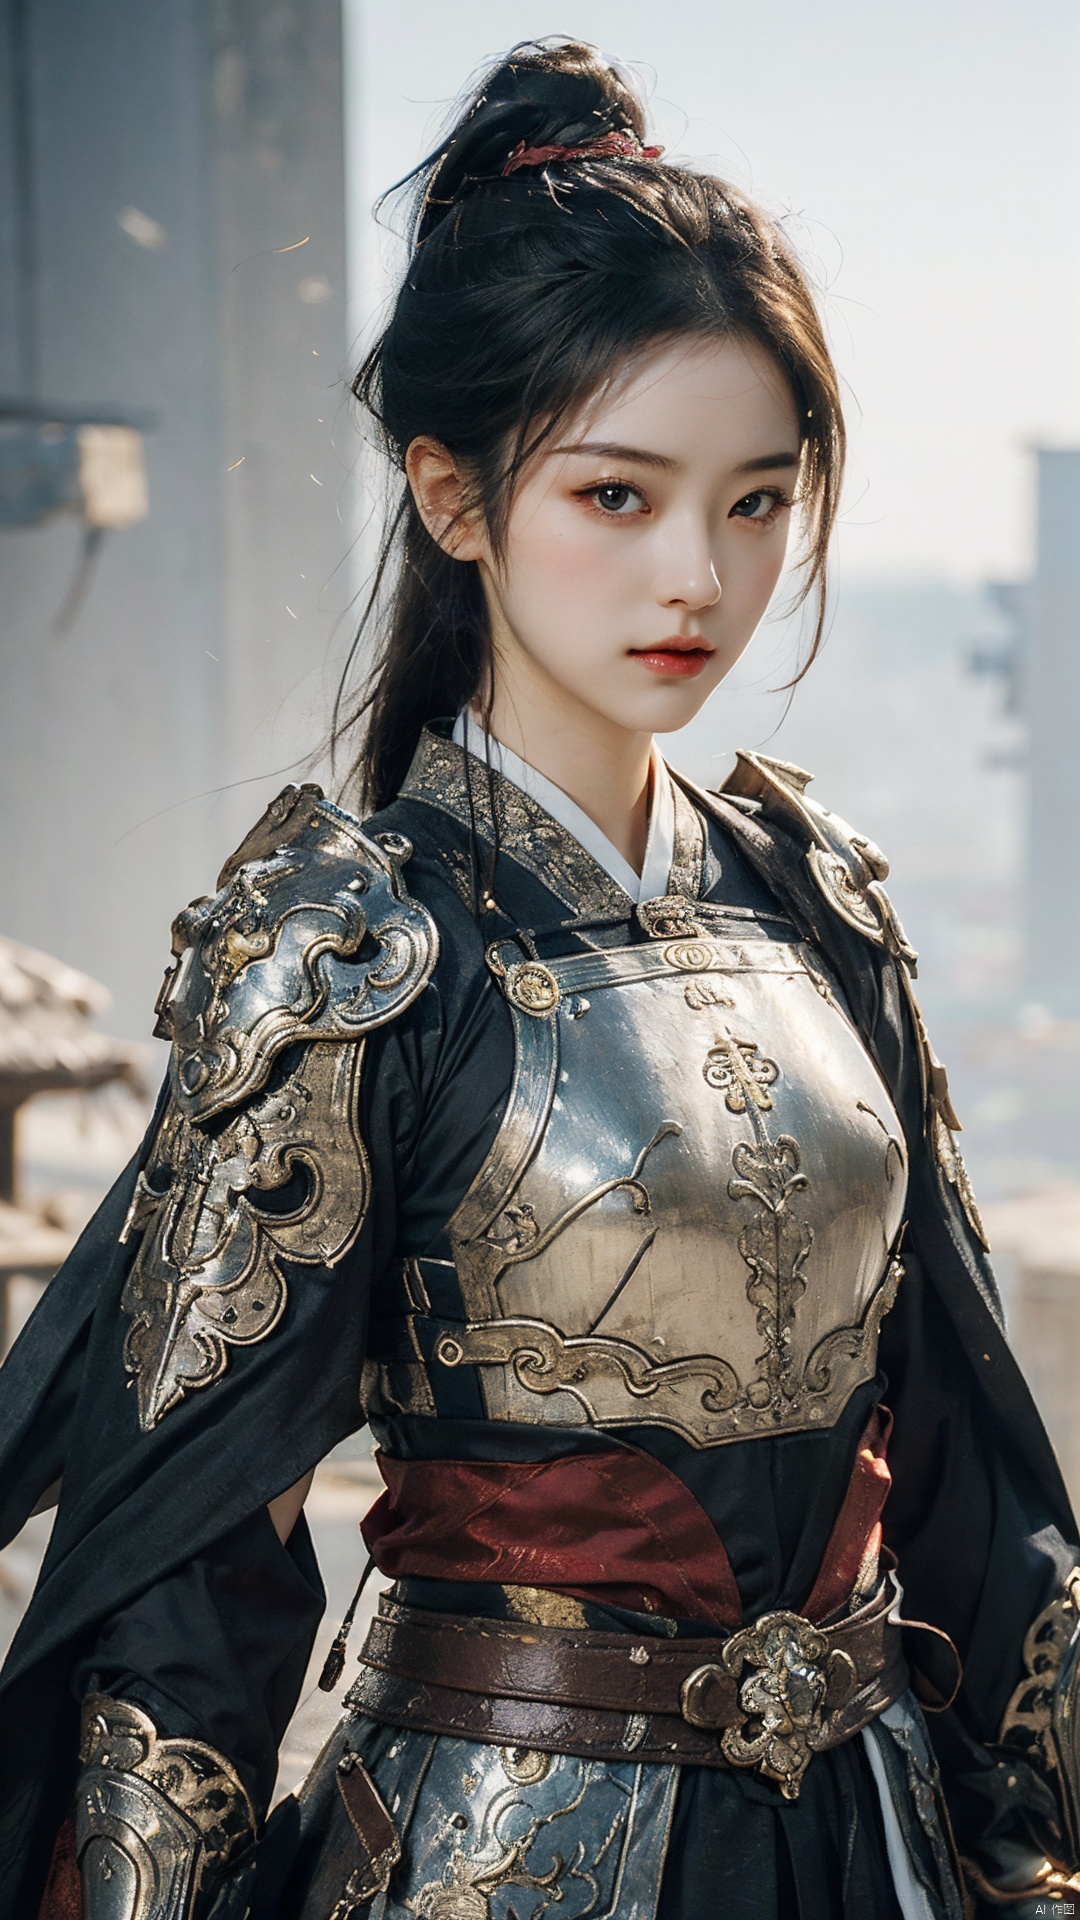  masterpiece,best quality,1girl, beautiful chinese girl, (beautiful detailed armor), (beautiful detailed hanfu), black eyes,see-through,
Game art,The best picture quality,Highest resolution,8K,(Head close-up),(Rule of thirds),(Female Warrior),
An eye rich in detail,(knightess),Elegant and noble,indifferent,brave,bandeau top,pauldron,gardebras,
(Ancient runes of light,Combat accessories with rich details,Metallic luster)
(super fucking cool:1.2)